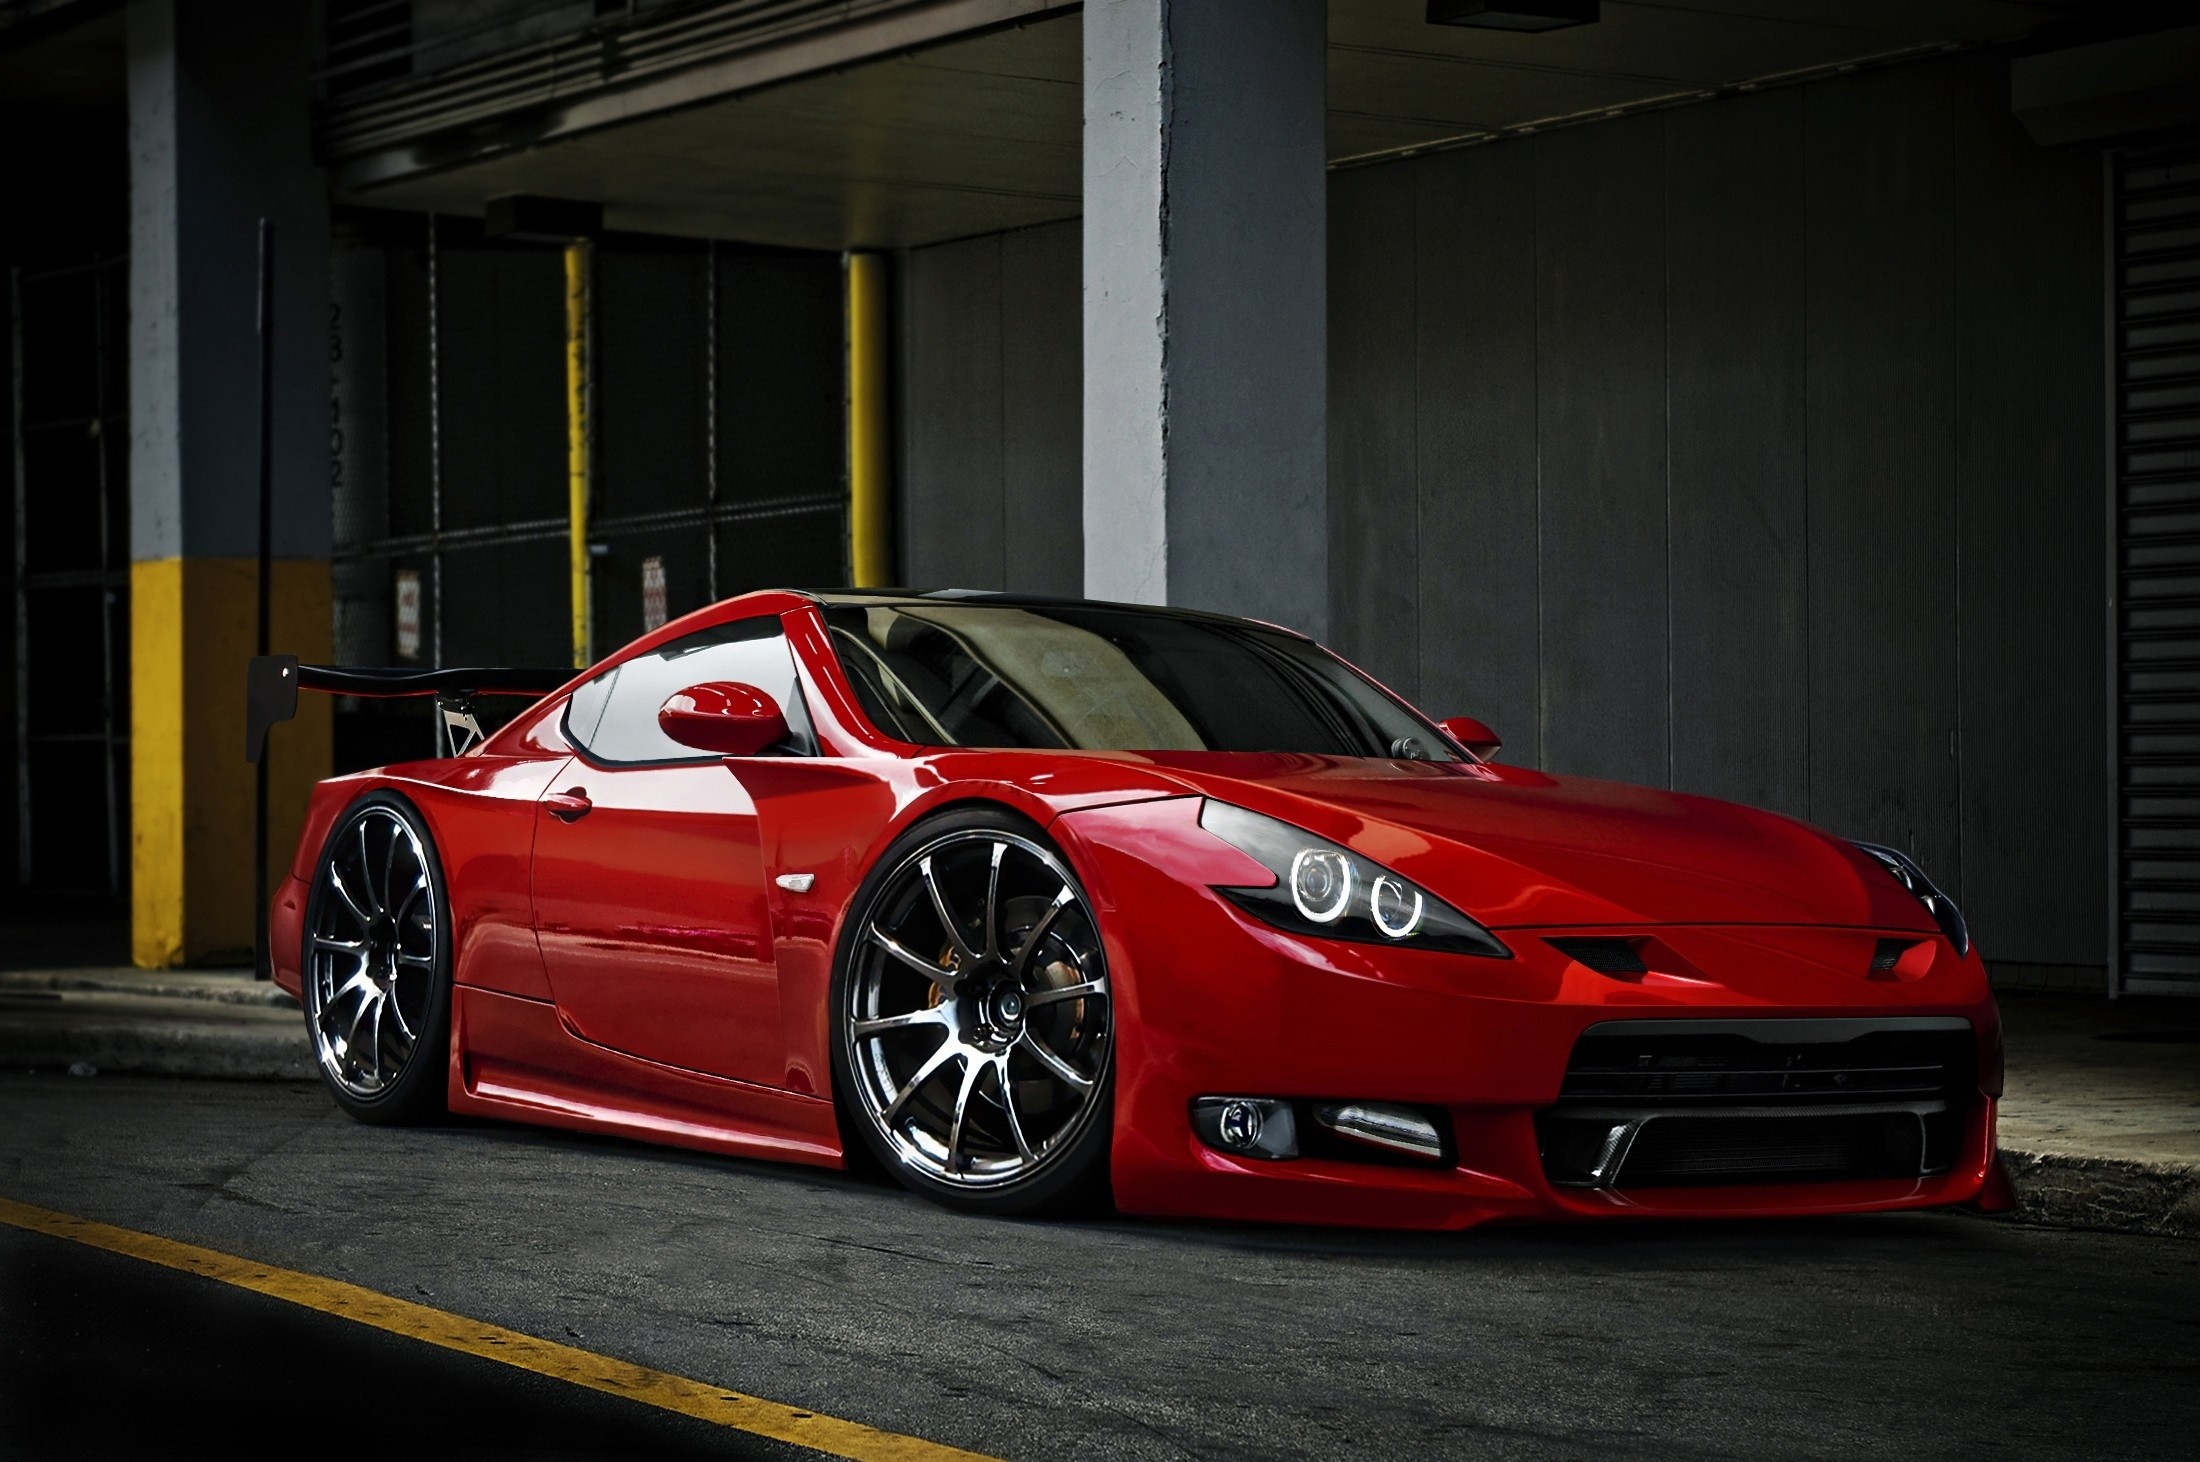 General 2200x1462 supercars red cars vehicle car